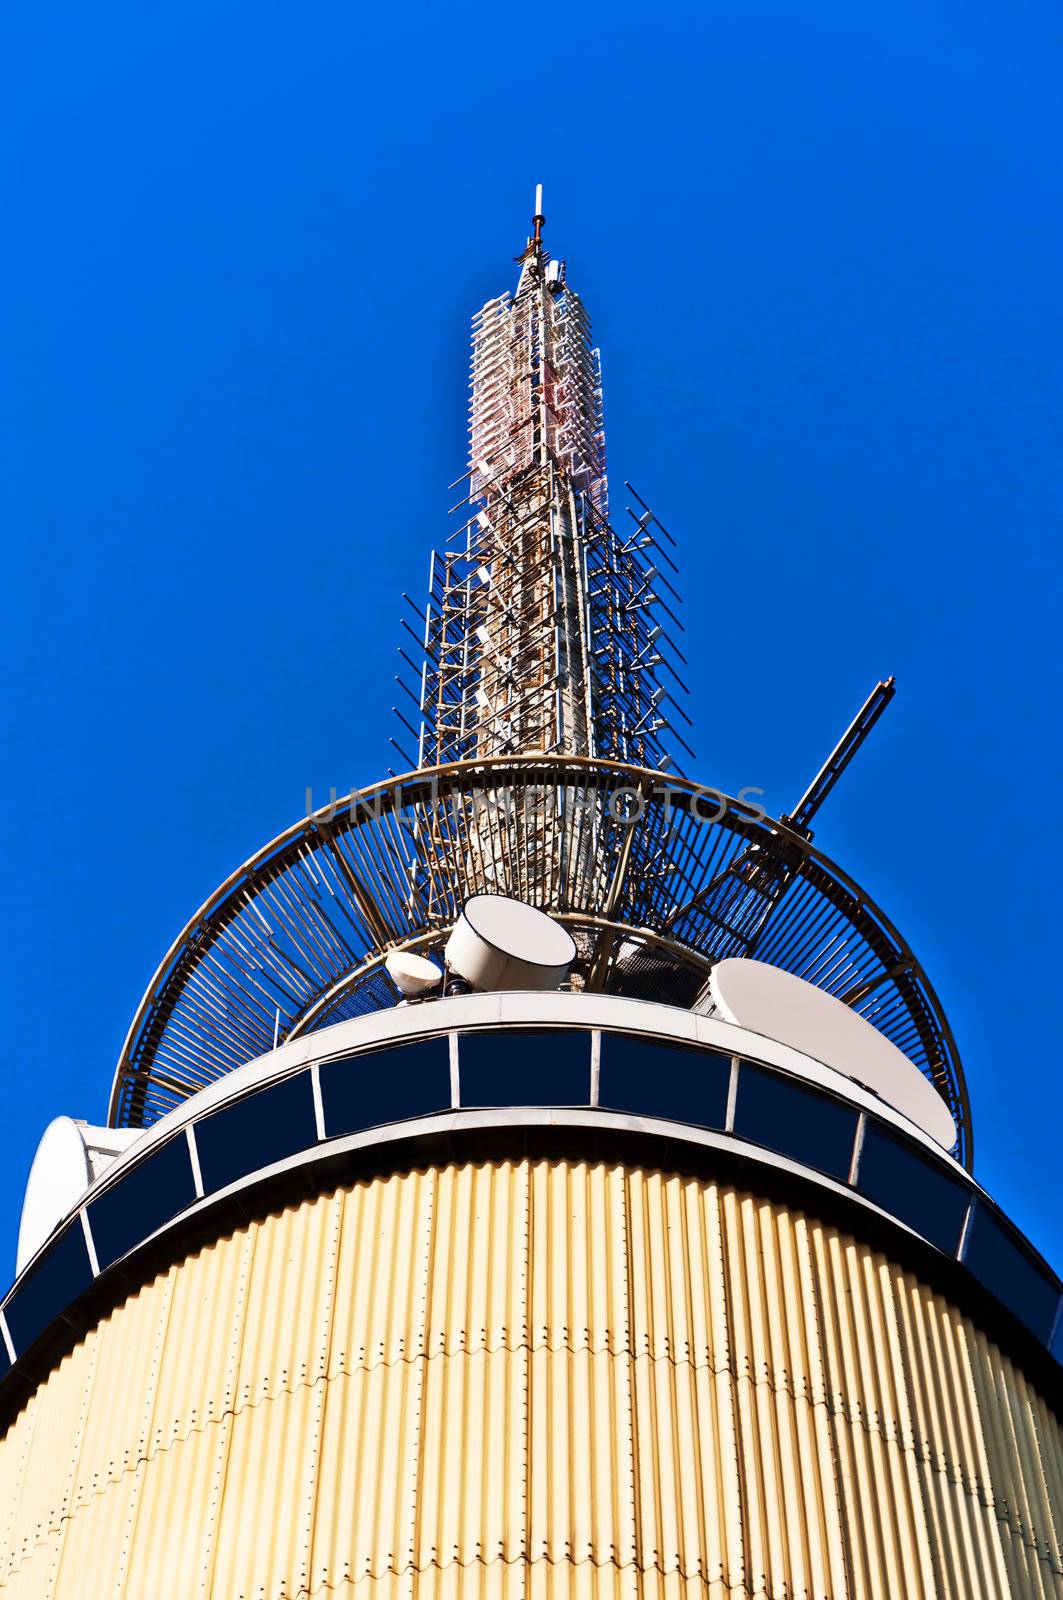 Telecom tower with microwave links and cellular network antennas by Nanisimova